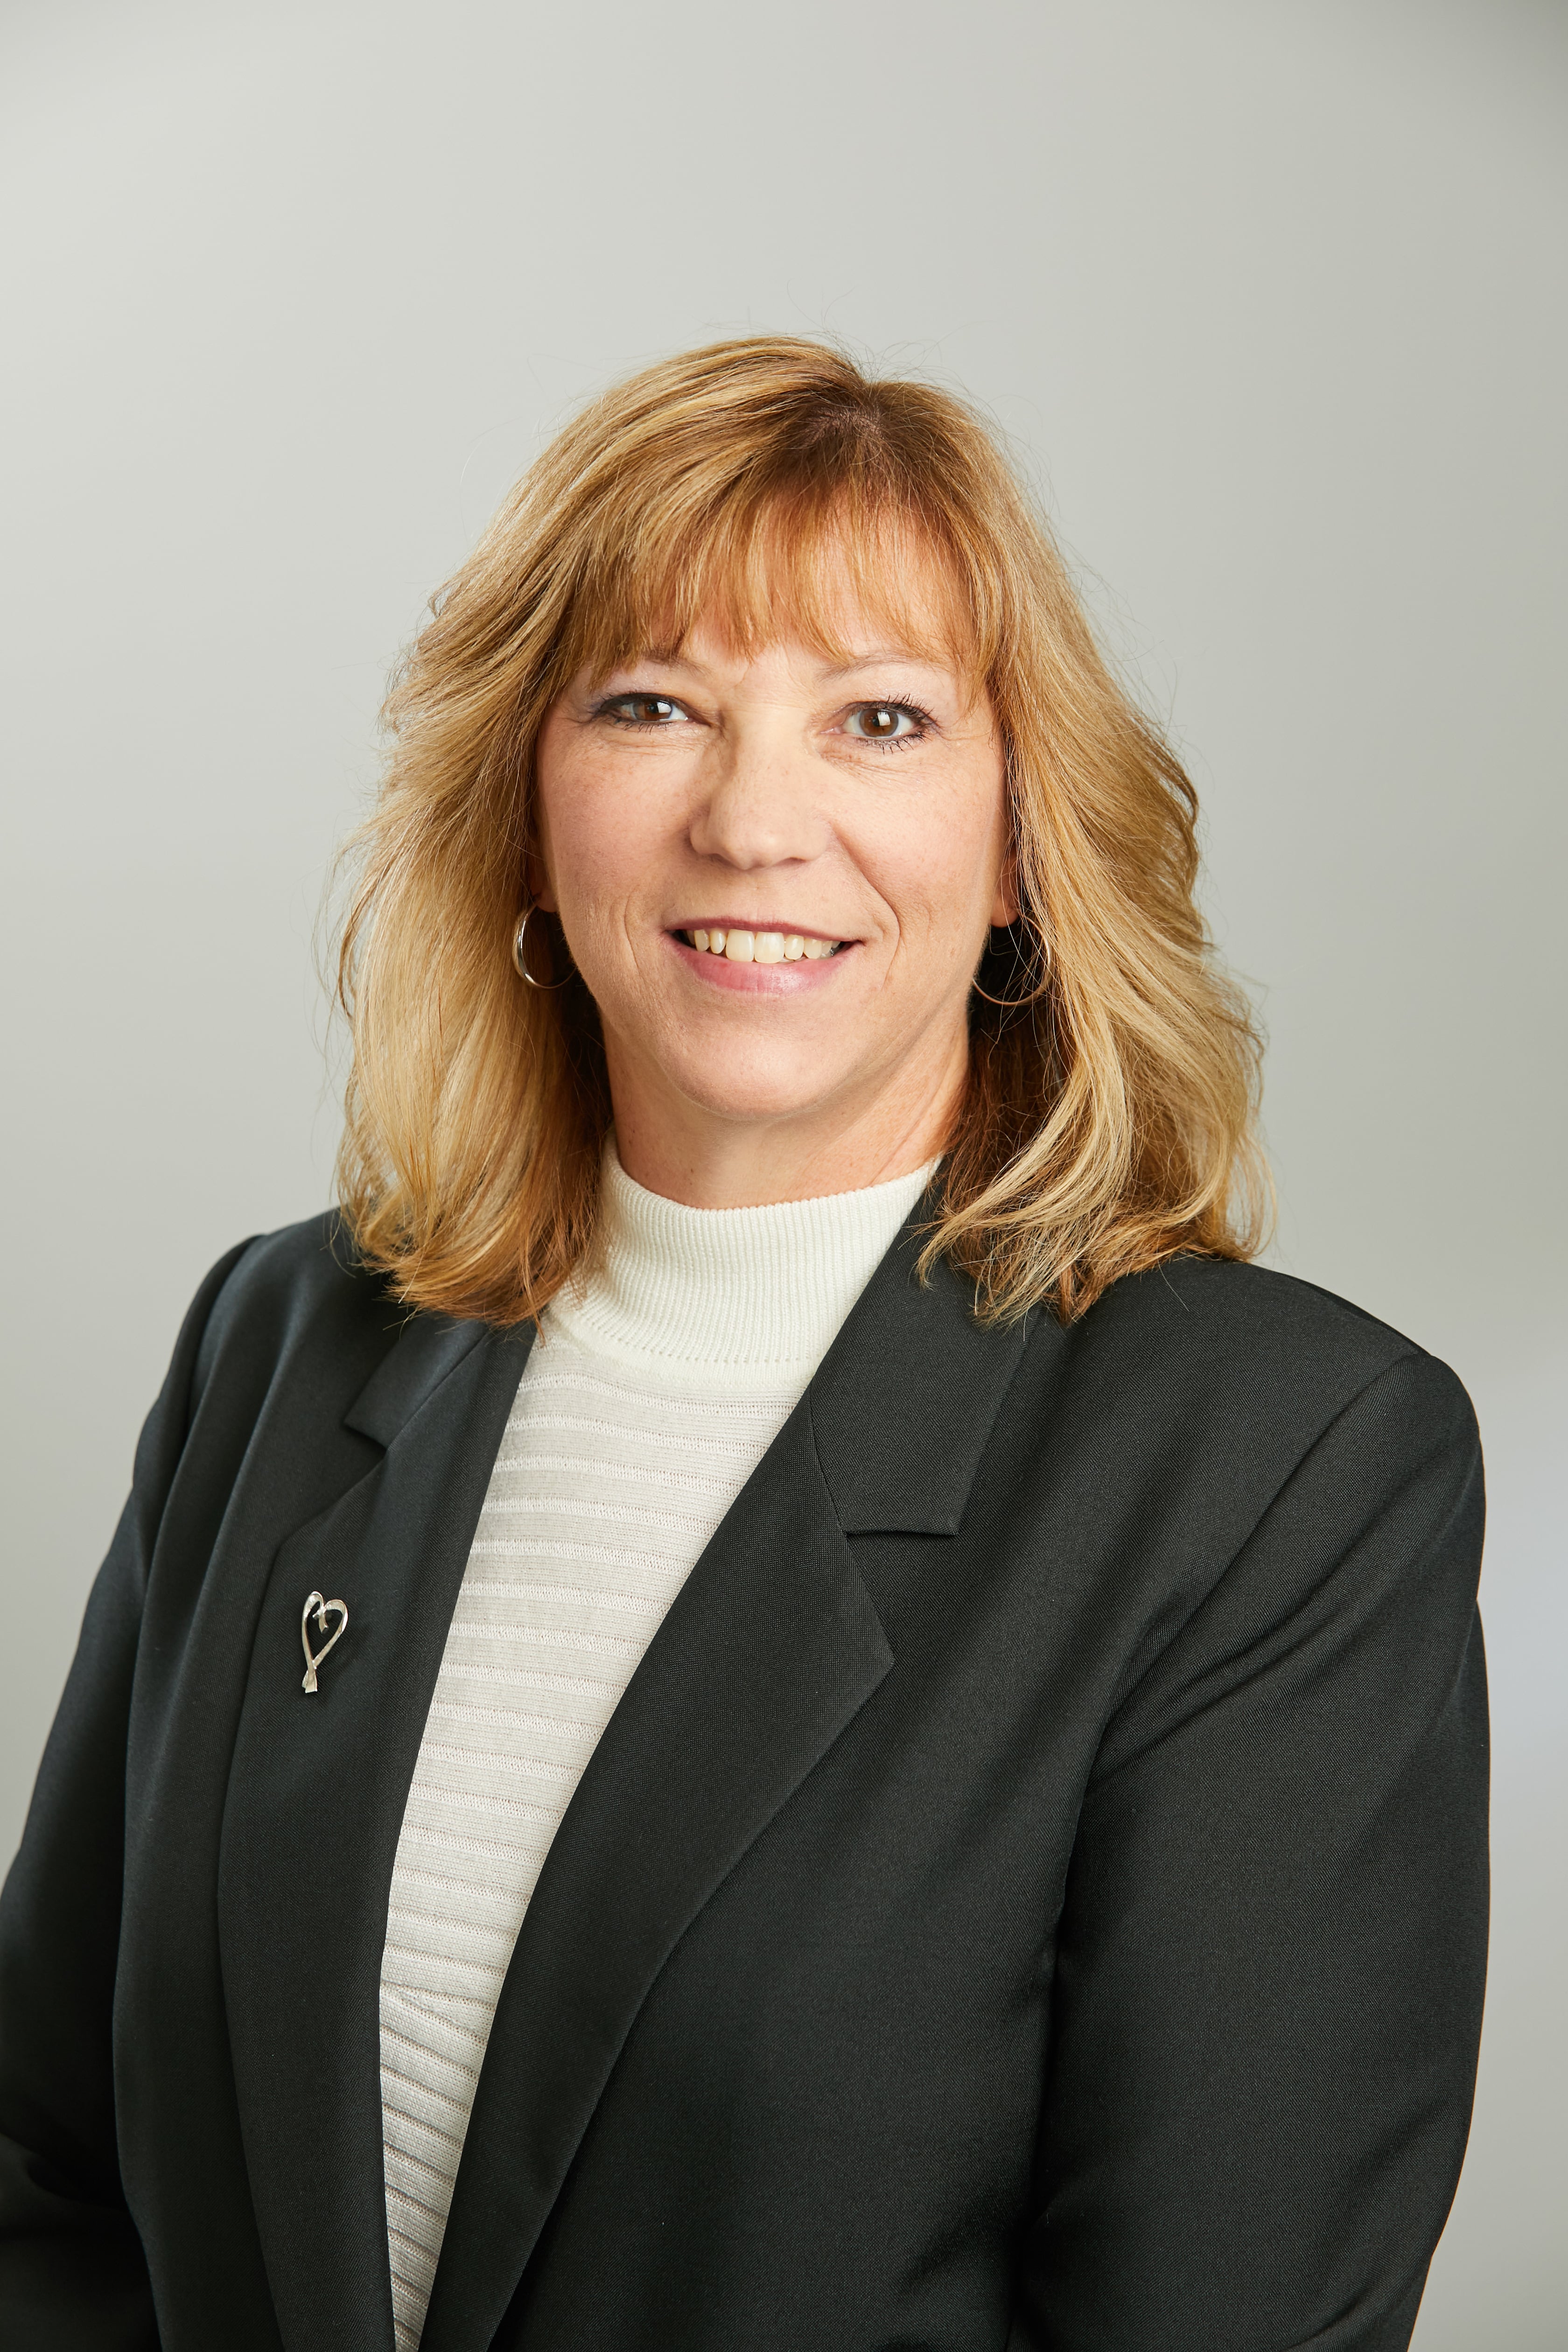 Annette Igl - VP of Human Resources